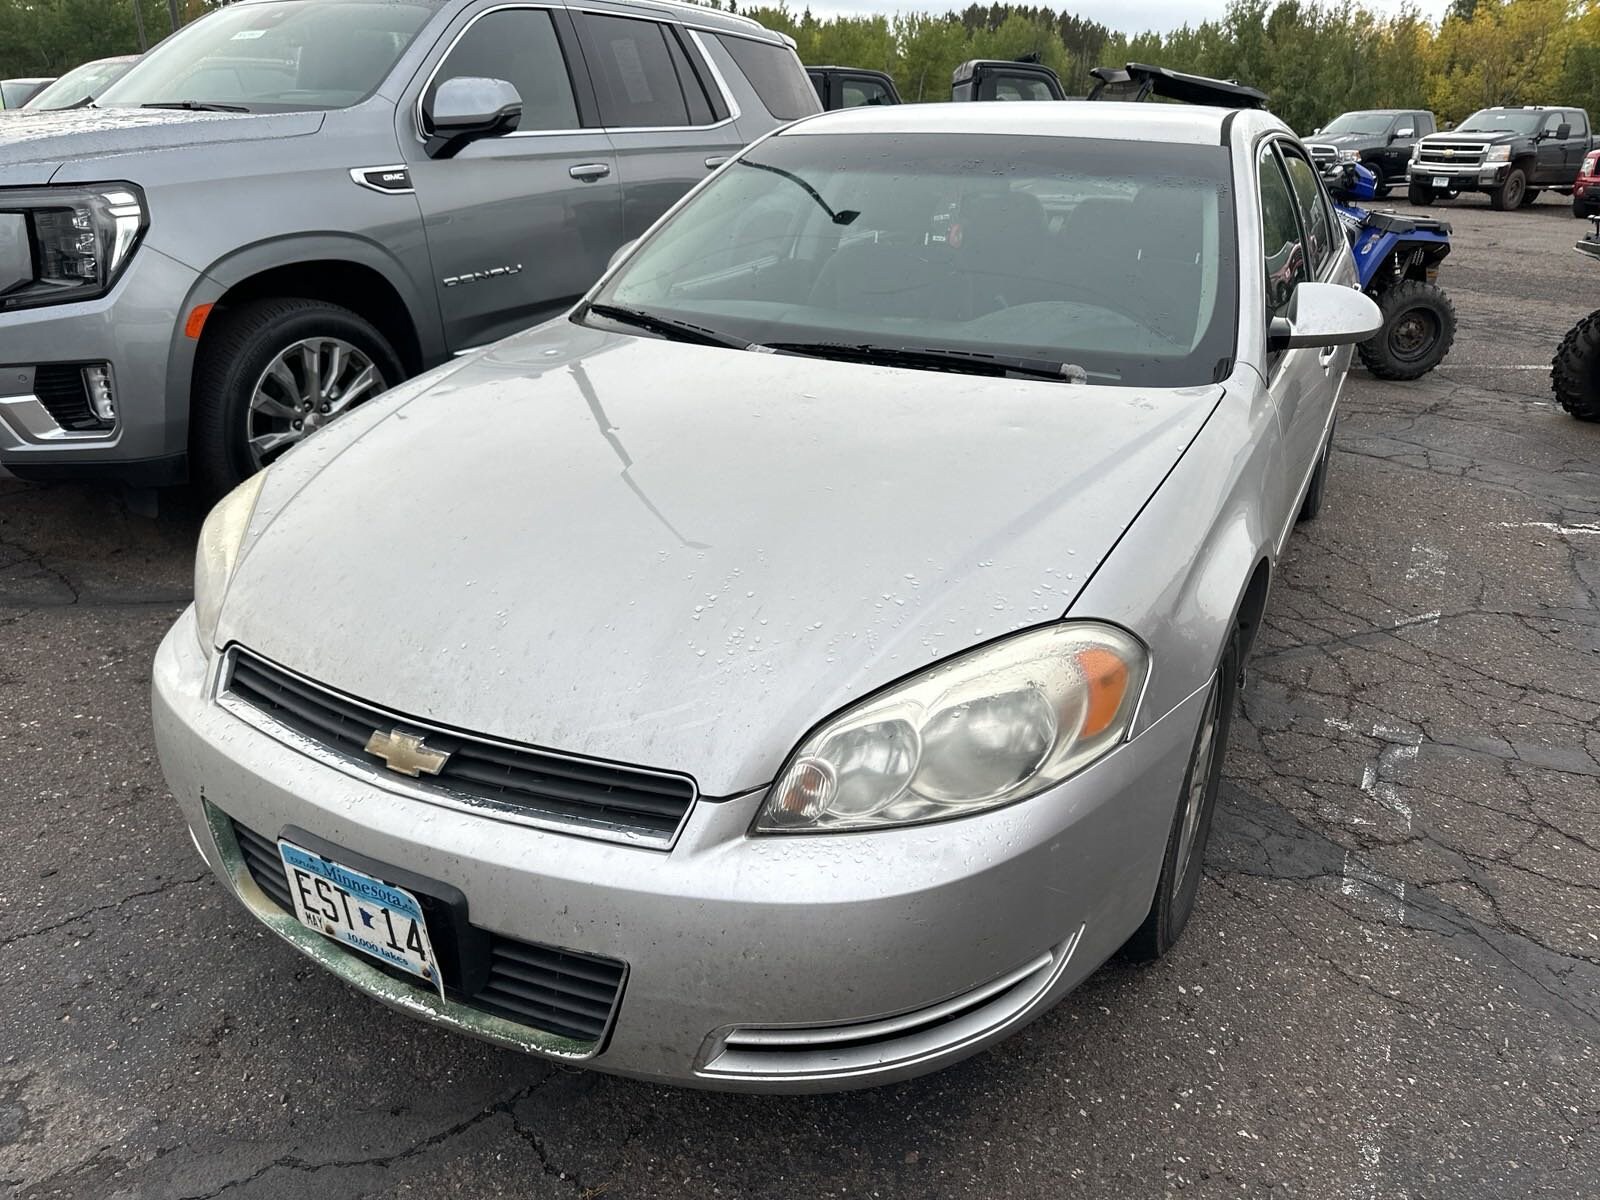 Used 2007 Chevrolet Impala LT with VIN 2G1WT58N279303630 for sale in Two Harbors, Minnesota